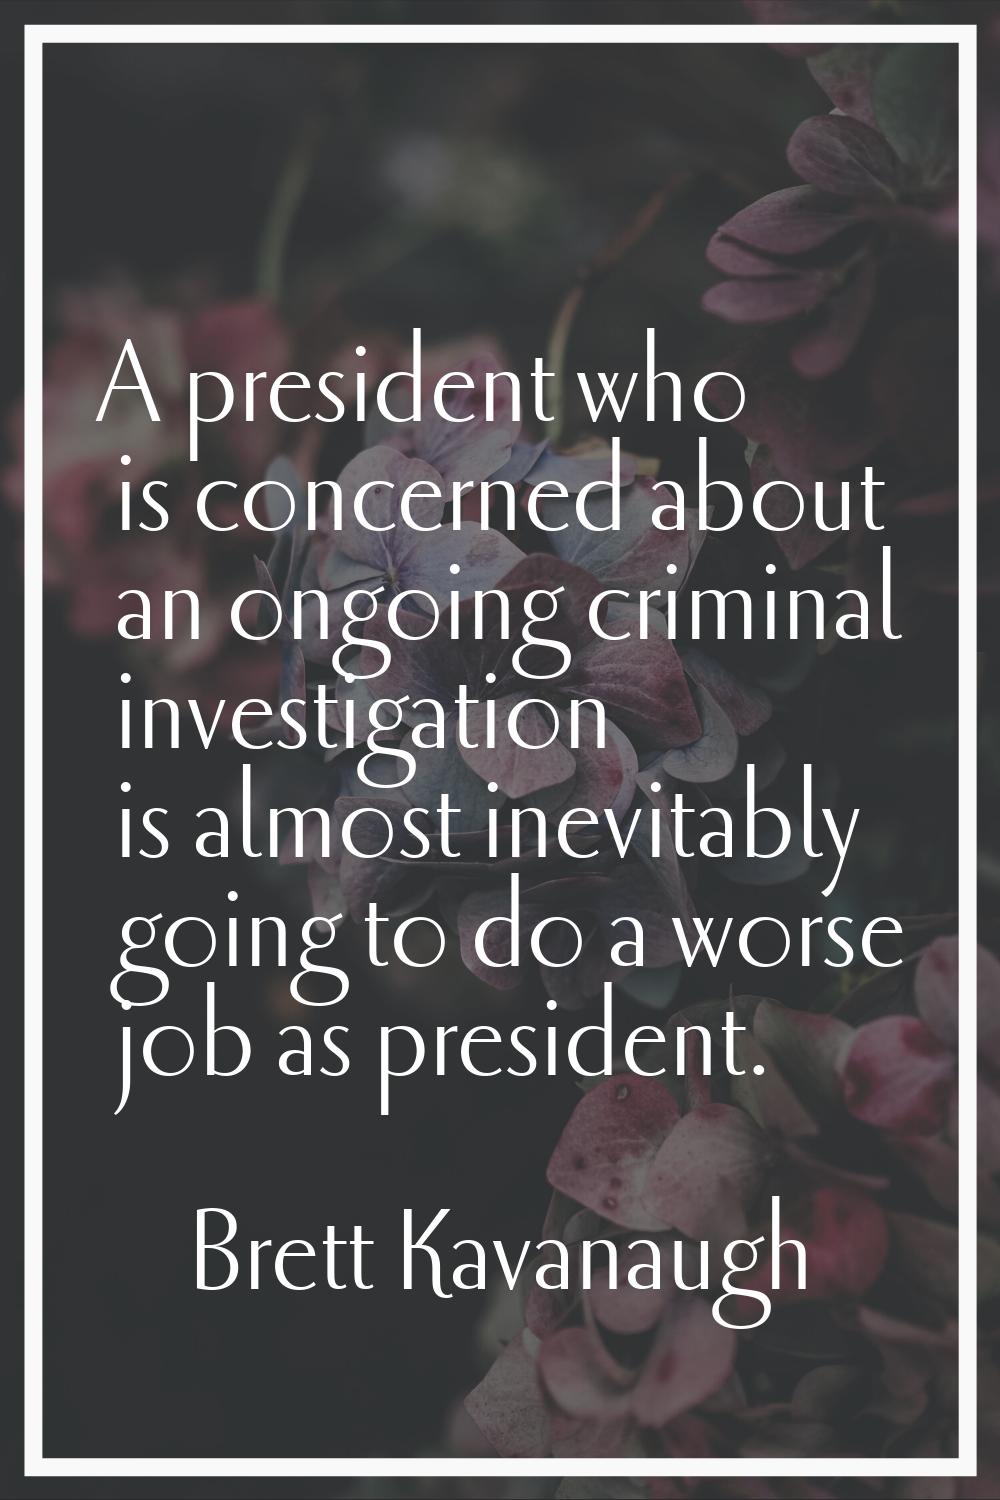 A president who is concerned about an ongoing criminal investigation is almost inevitably going to 